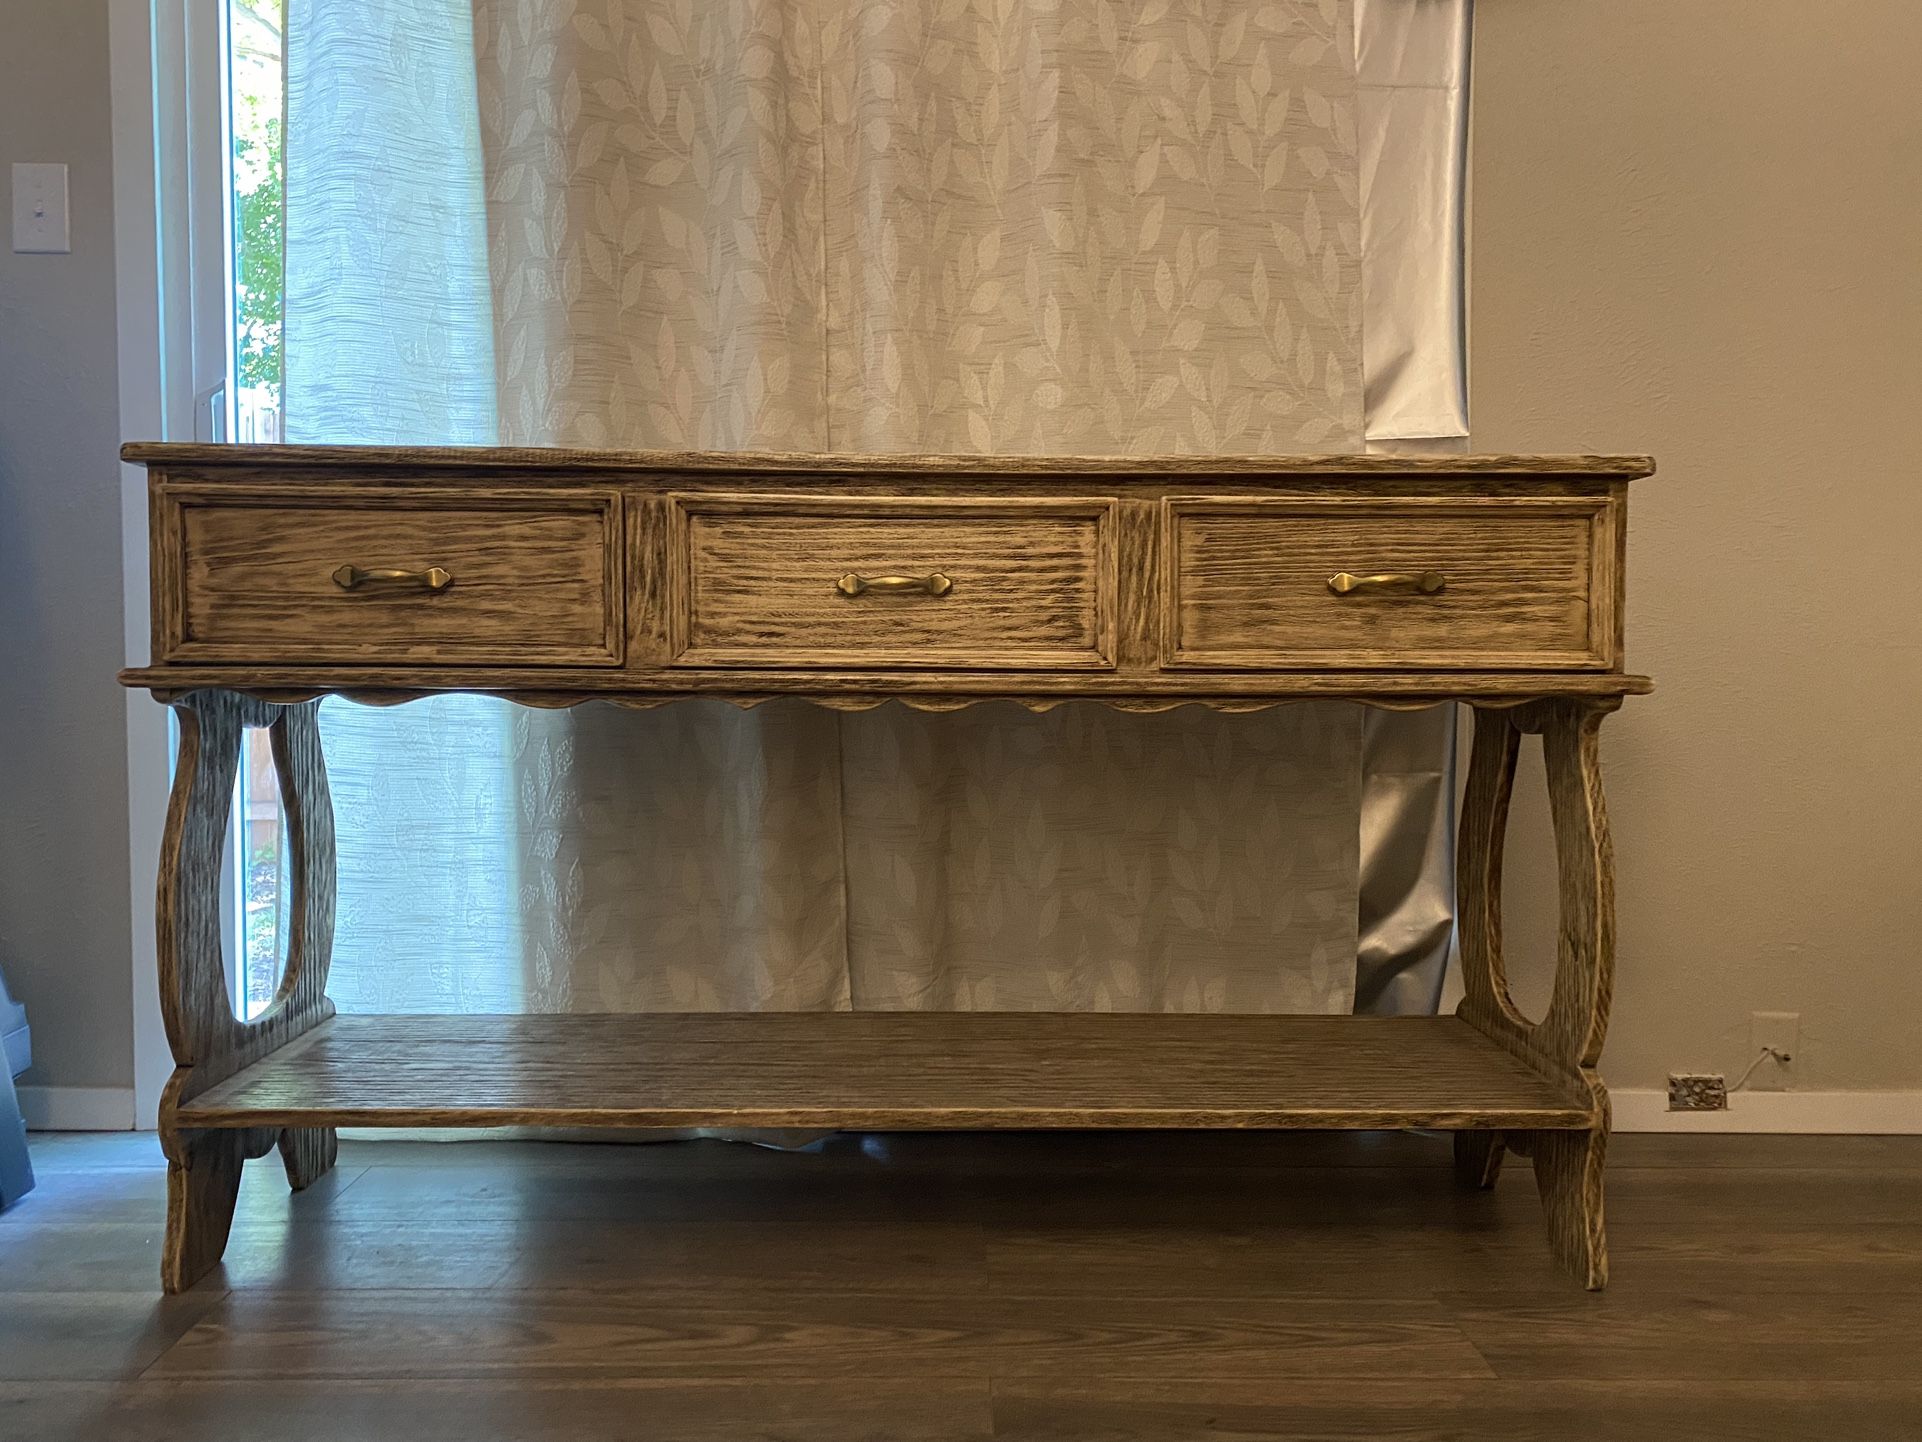 Entry Wood Table With 3 Drawers